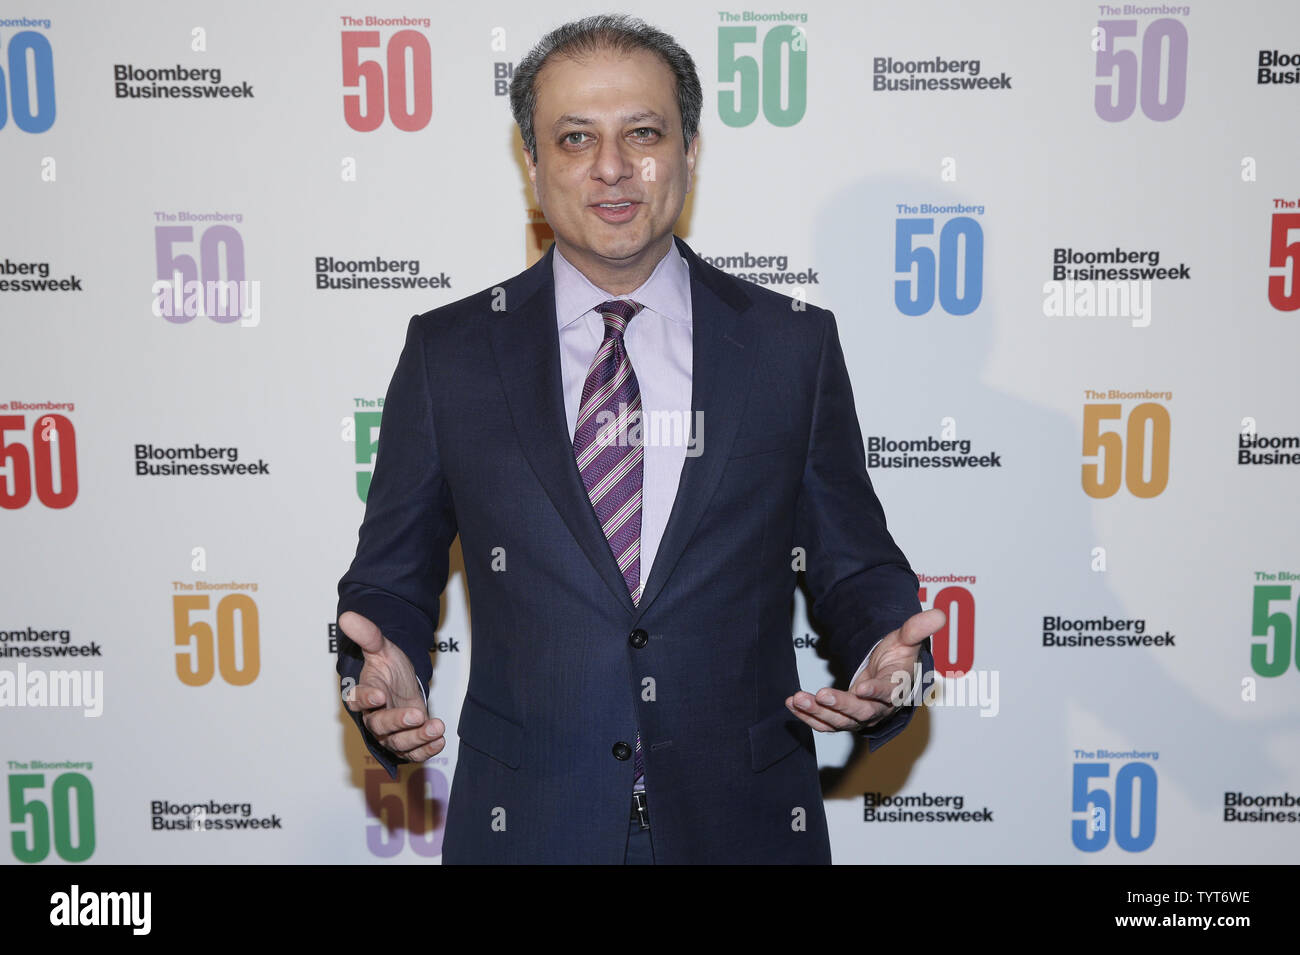 Preet Bharara arrives on the red carpet at 'The Bloomberg 50' Celebration at Gotham Hall on December 4, 2017 in New York City.      Photo by John Angelillo/UPI Stock Photo